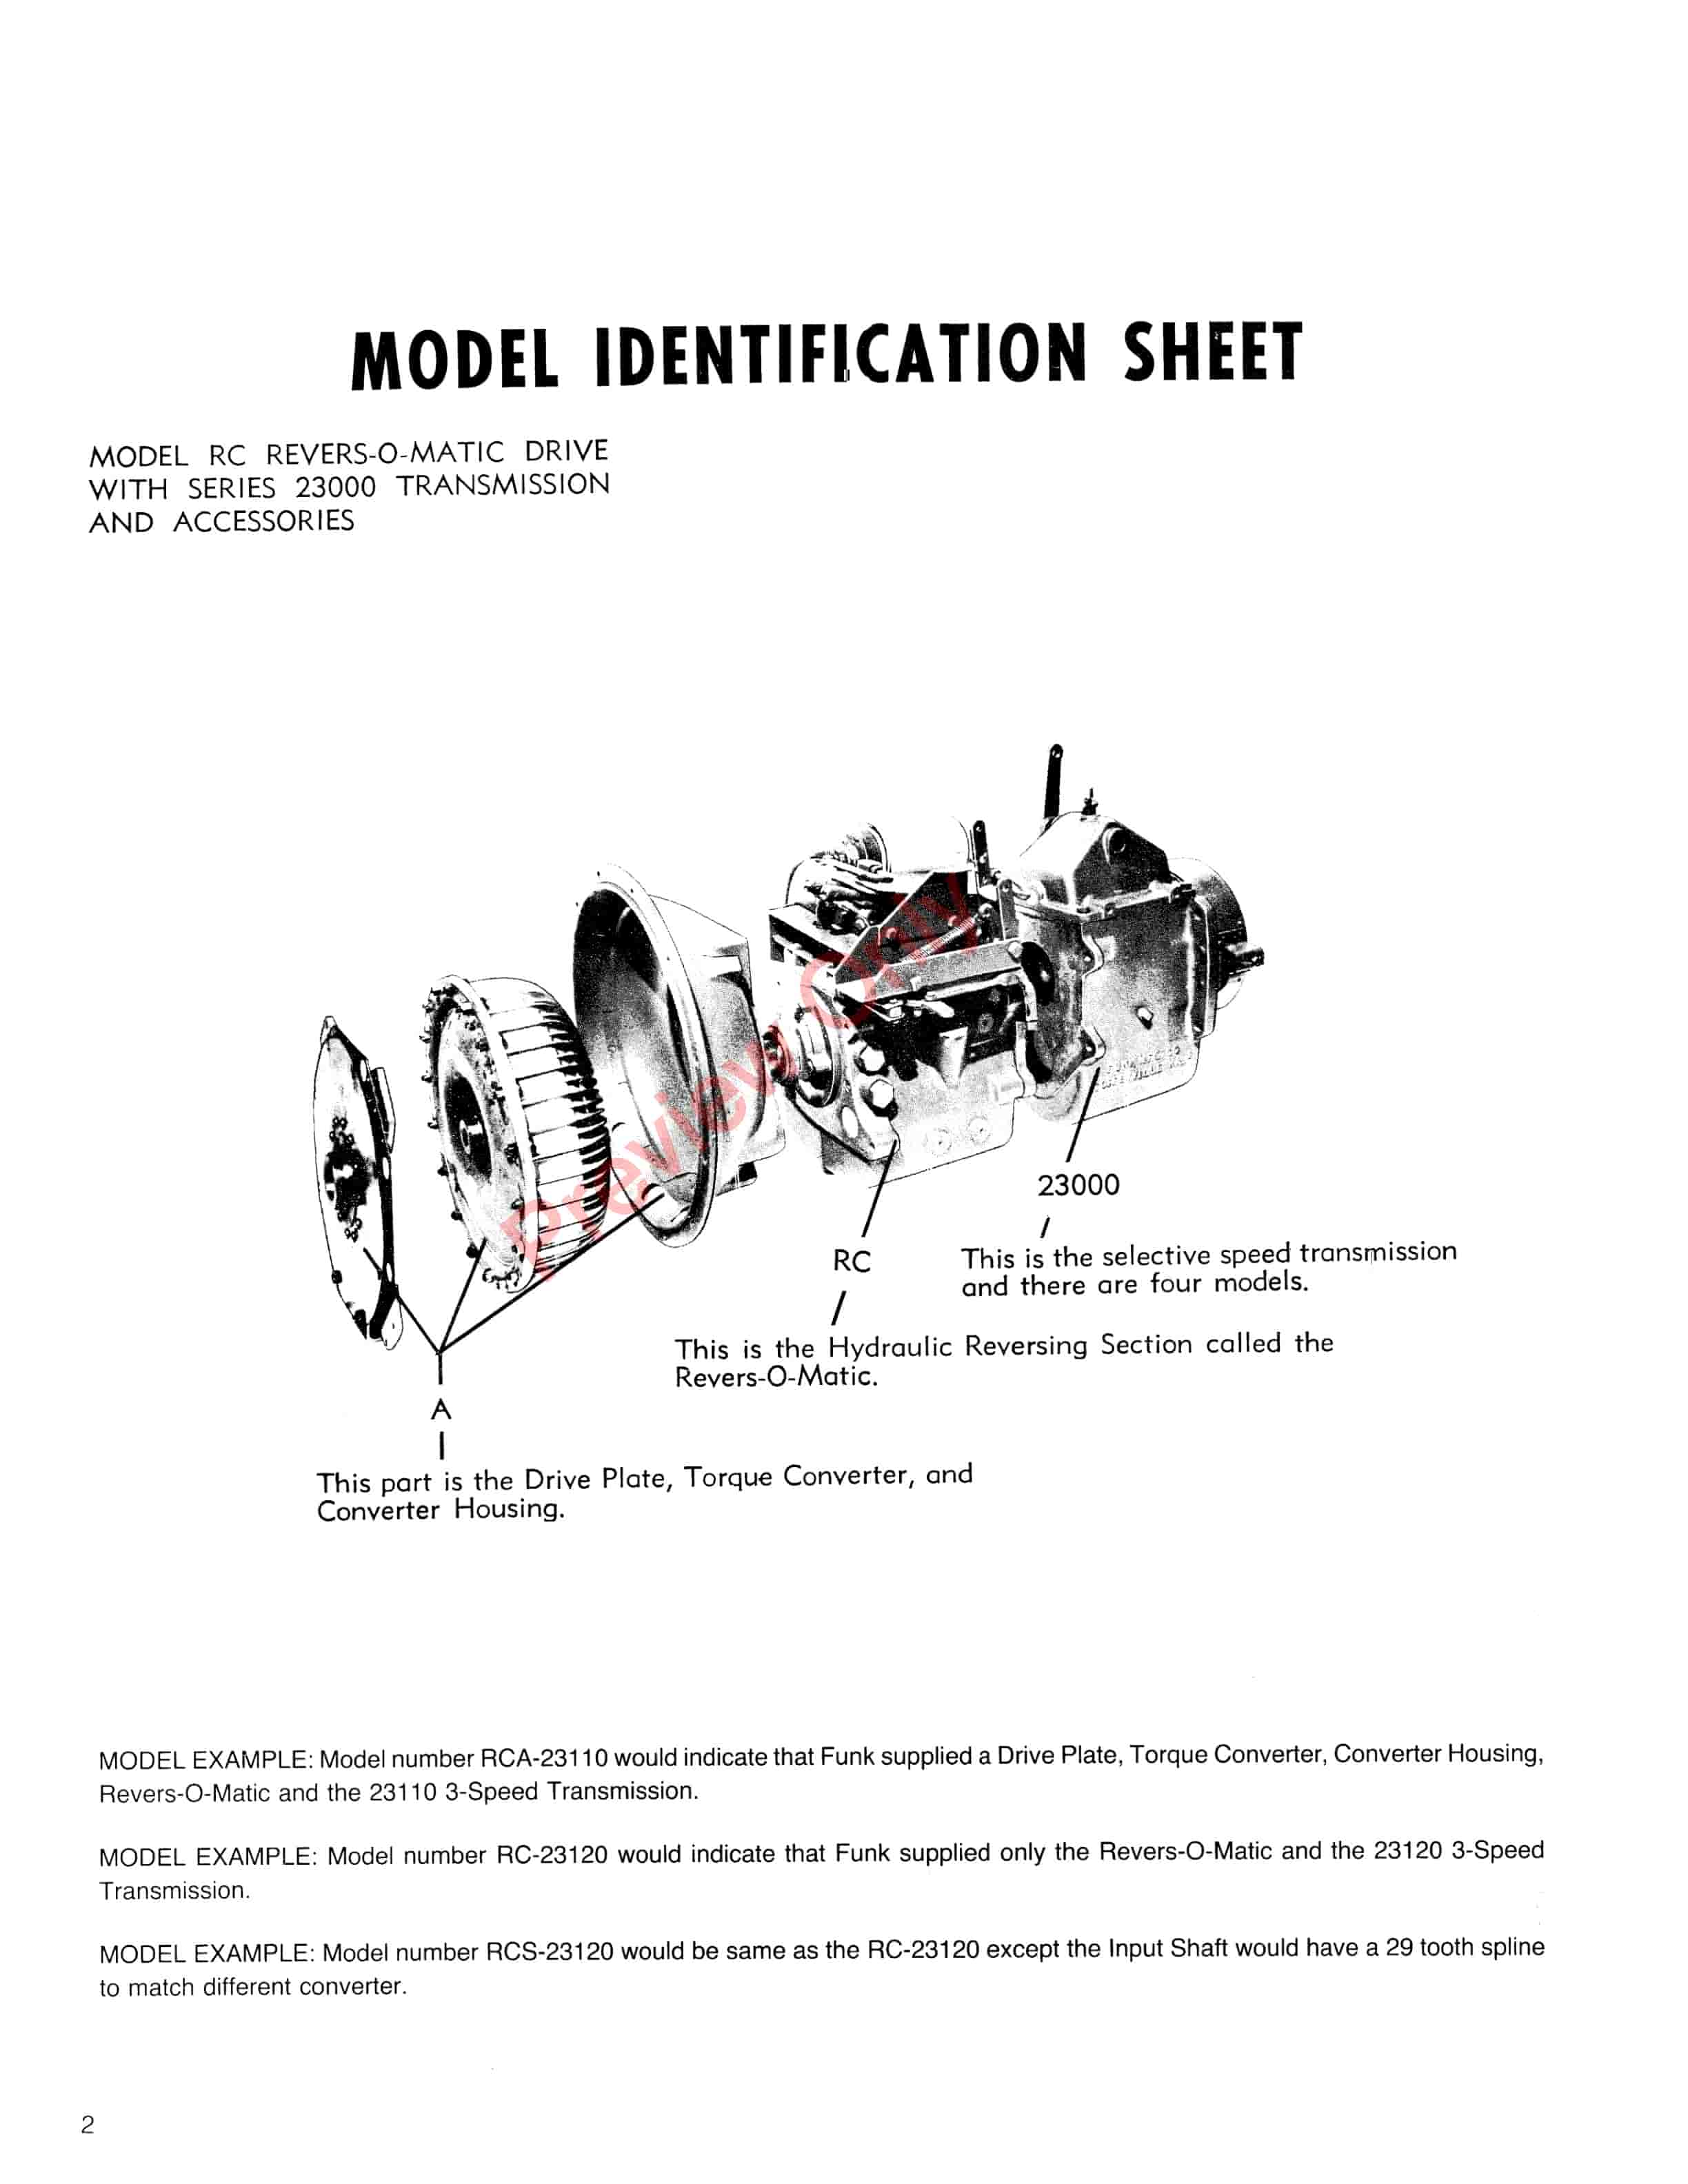 John Deere RC23000 Series Hydraulic Motor Driven Transmission Service And Parts Assembly Manual 4005056 01FEB96 4